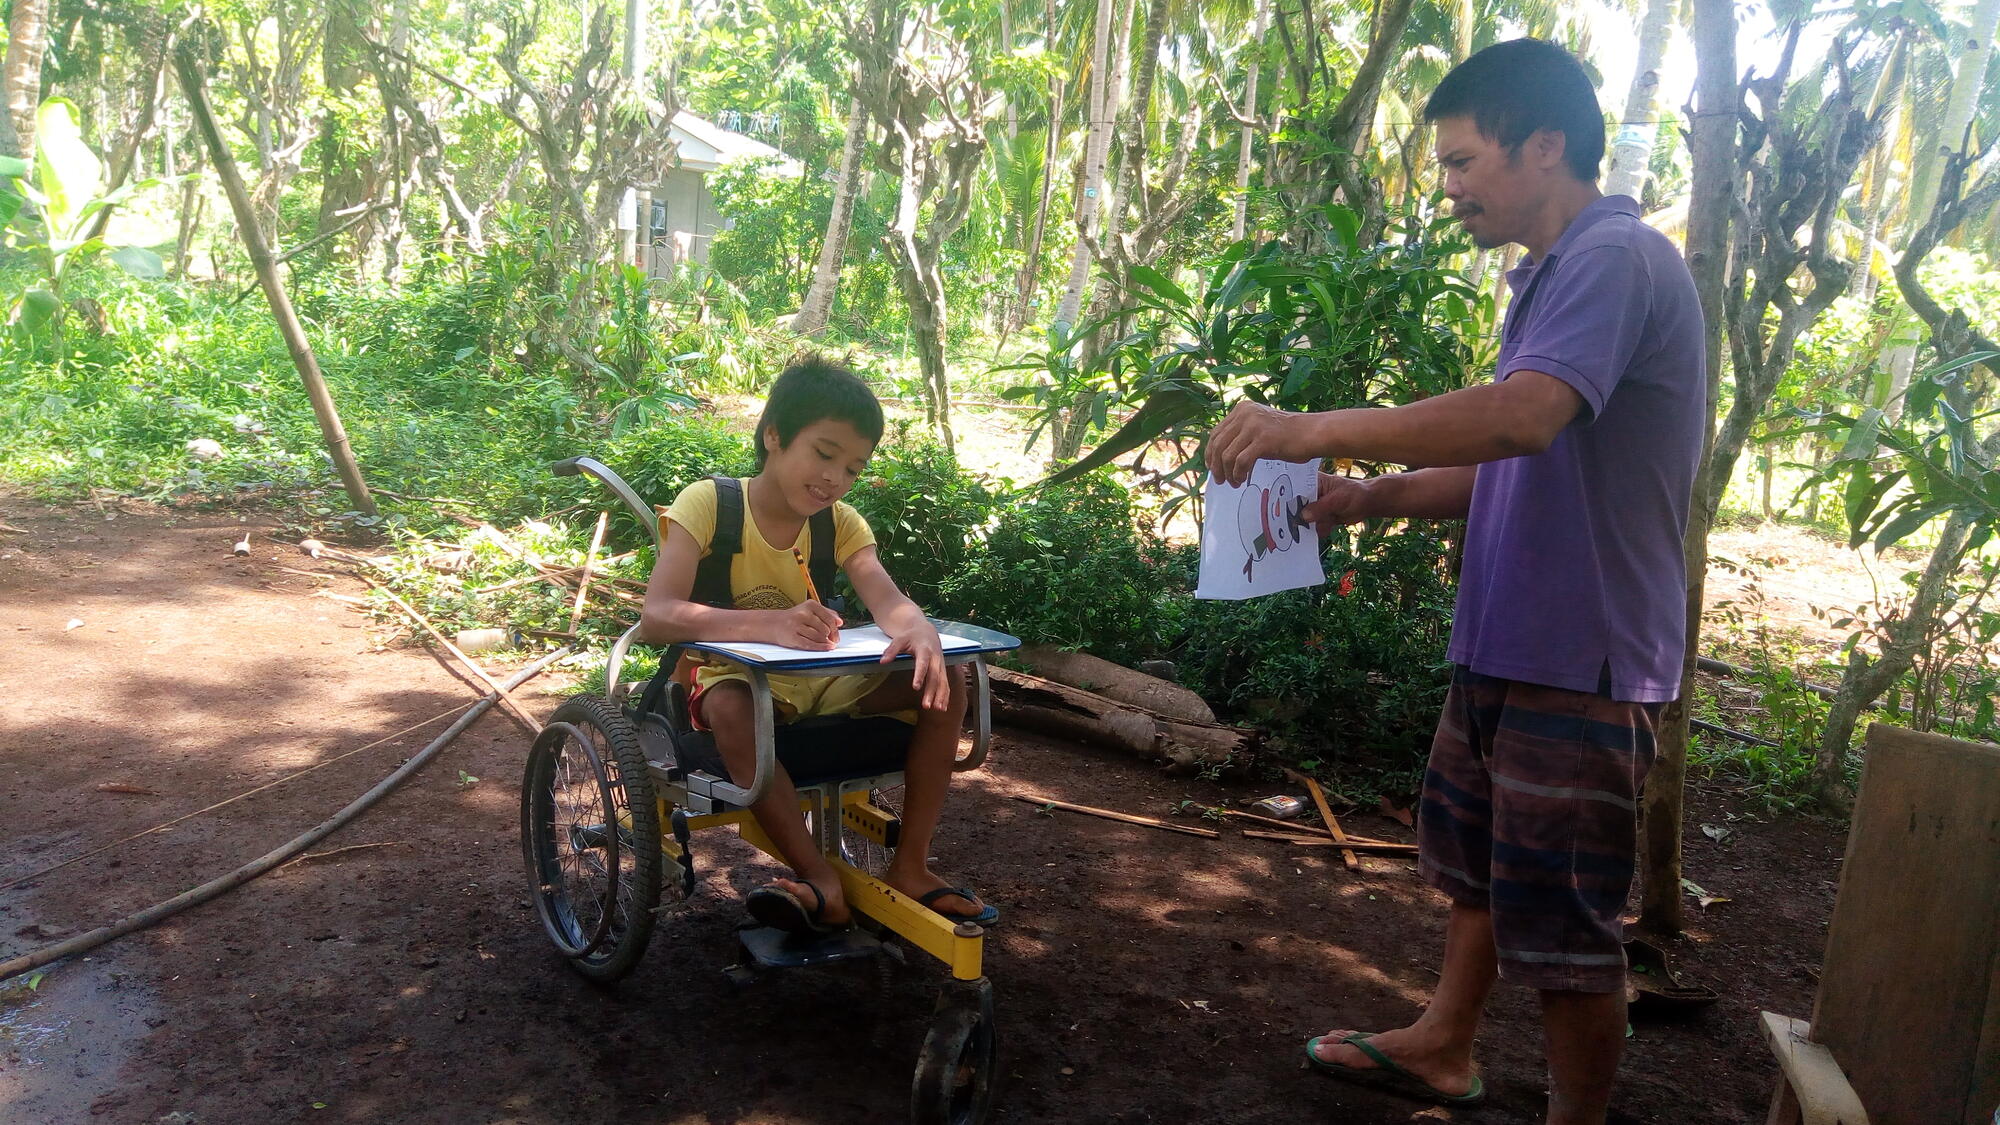 World Vision sponsored child Angelito, 12, was born with cerebral palsy